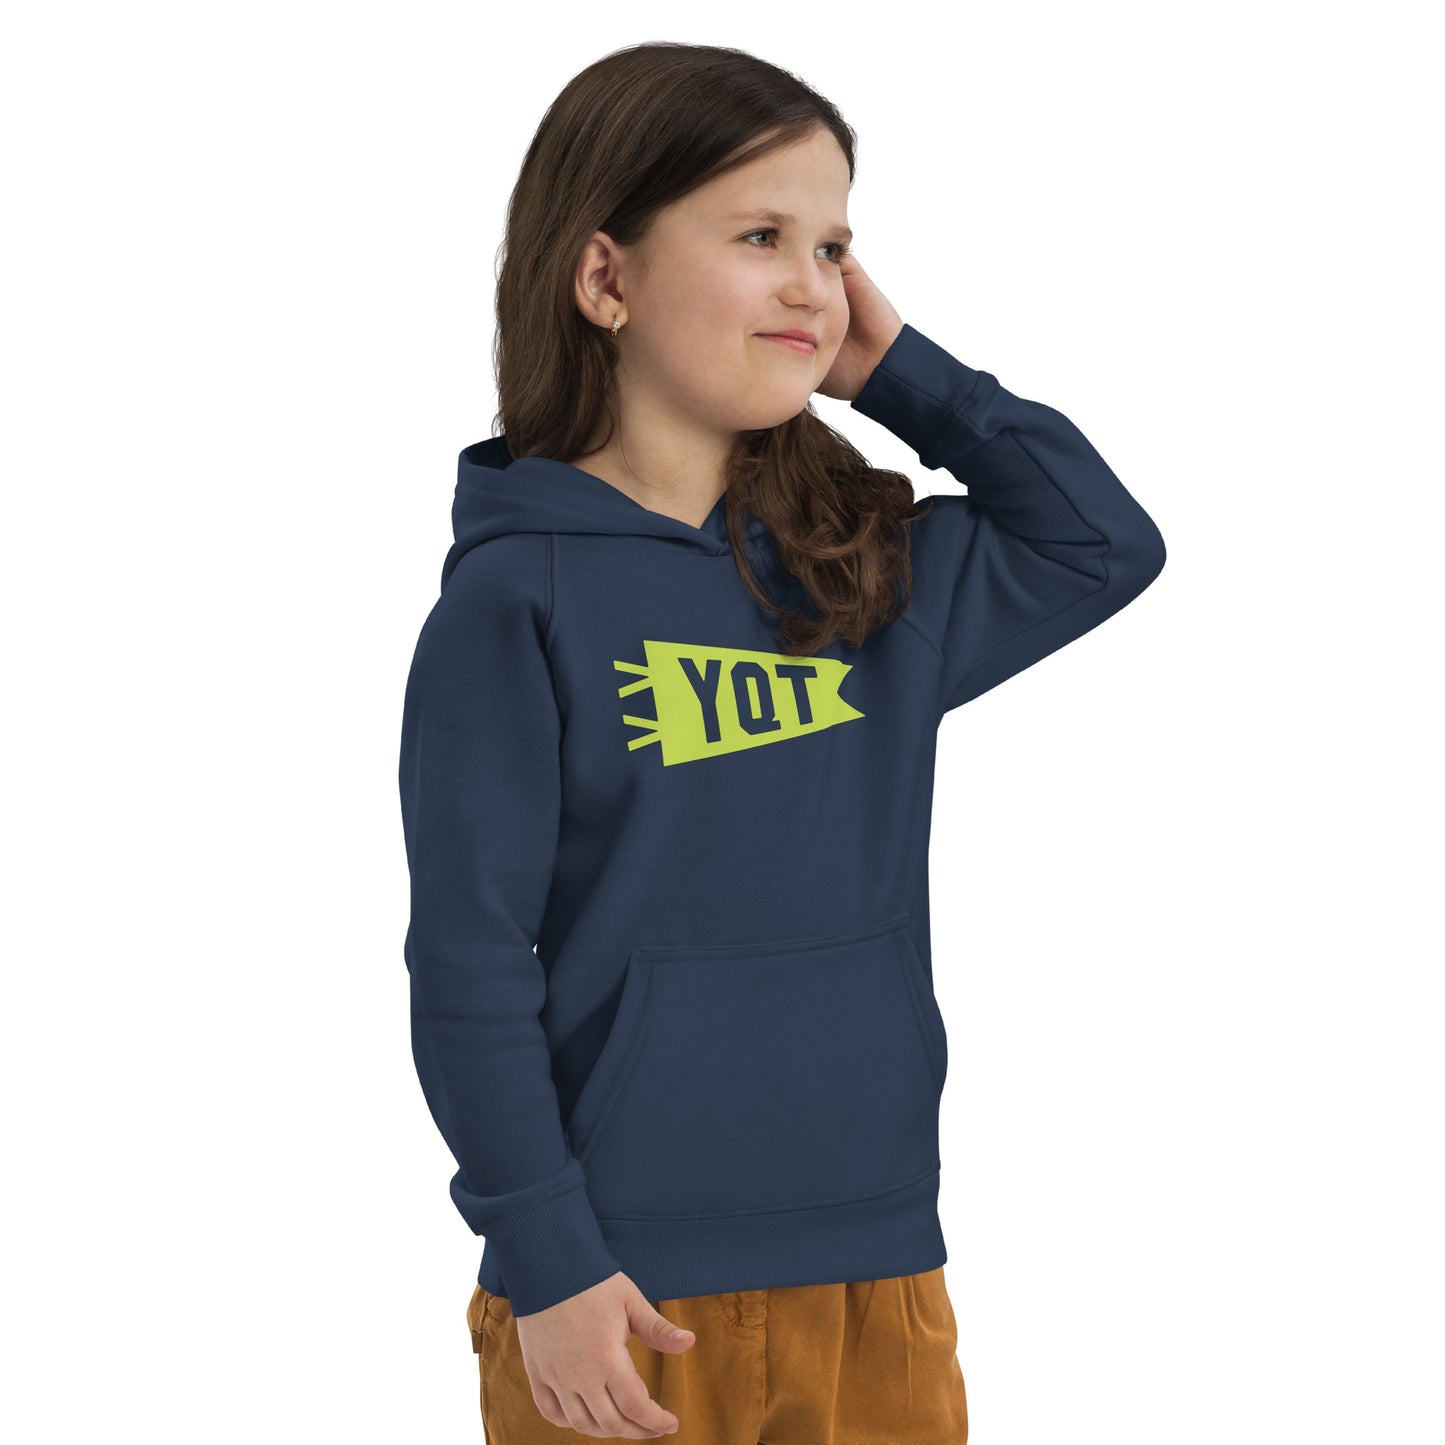 Kid's Sustainable Hoodie - Green Graphic • YQT Thunder Bay • YHM Designs - Image 06